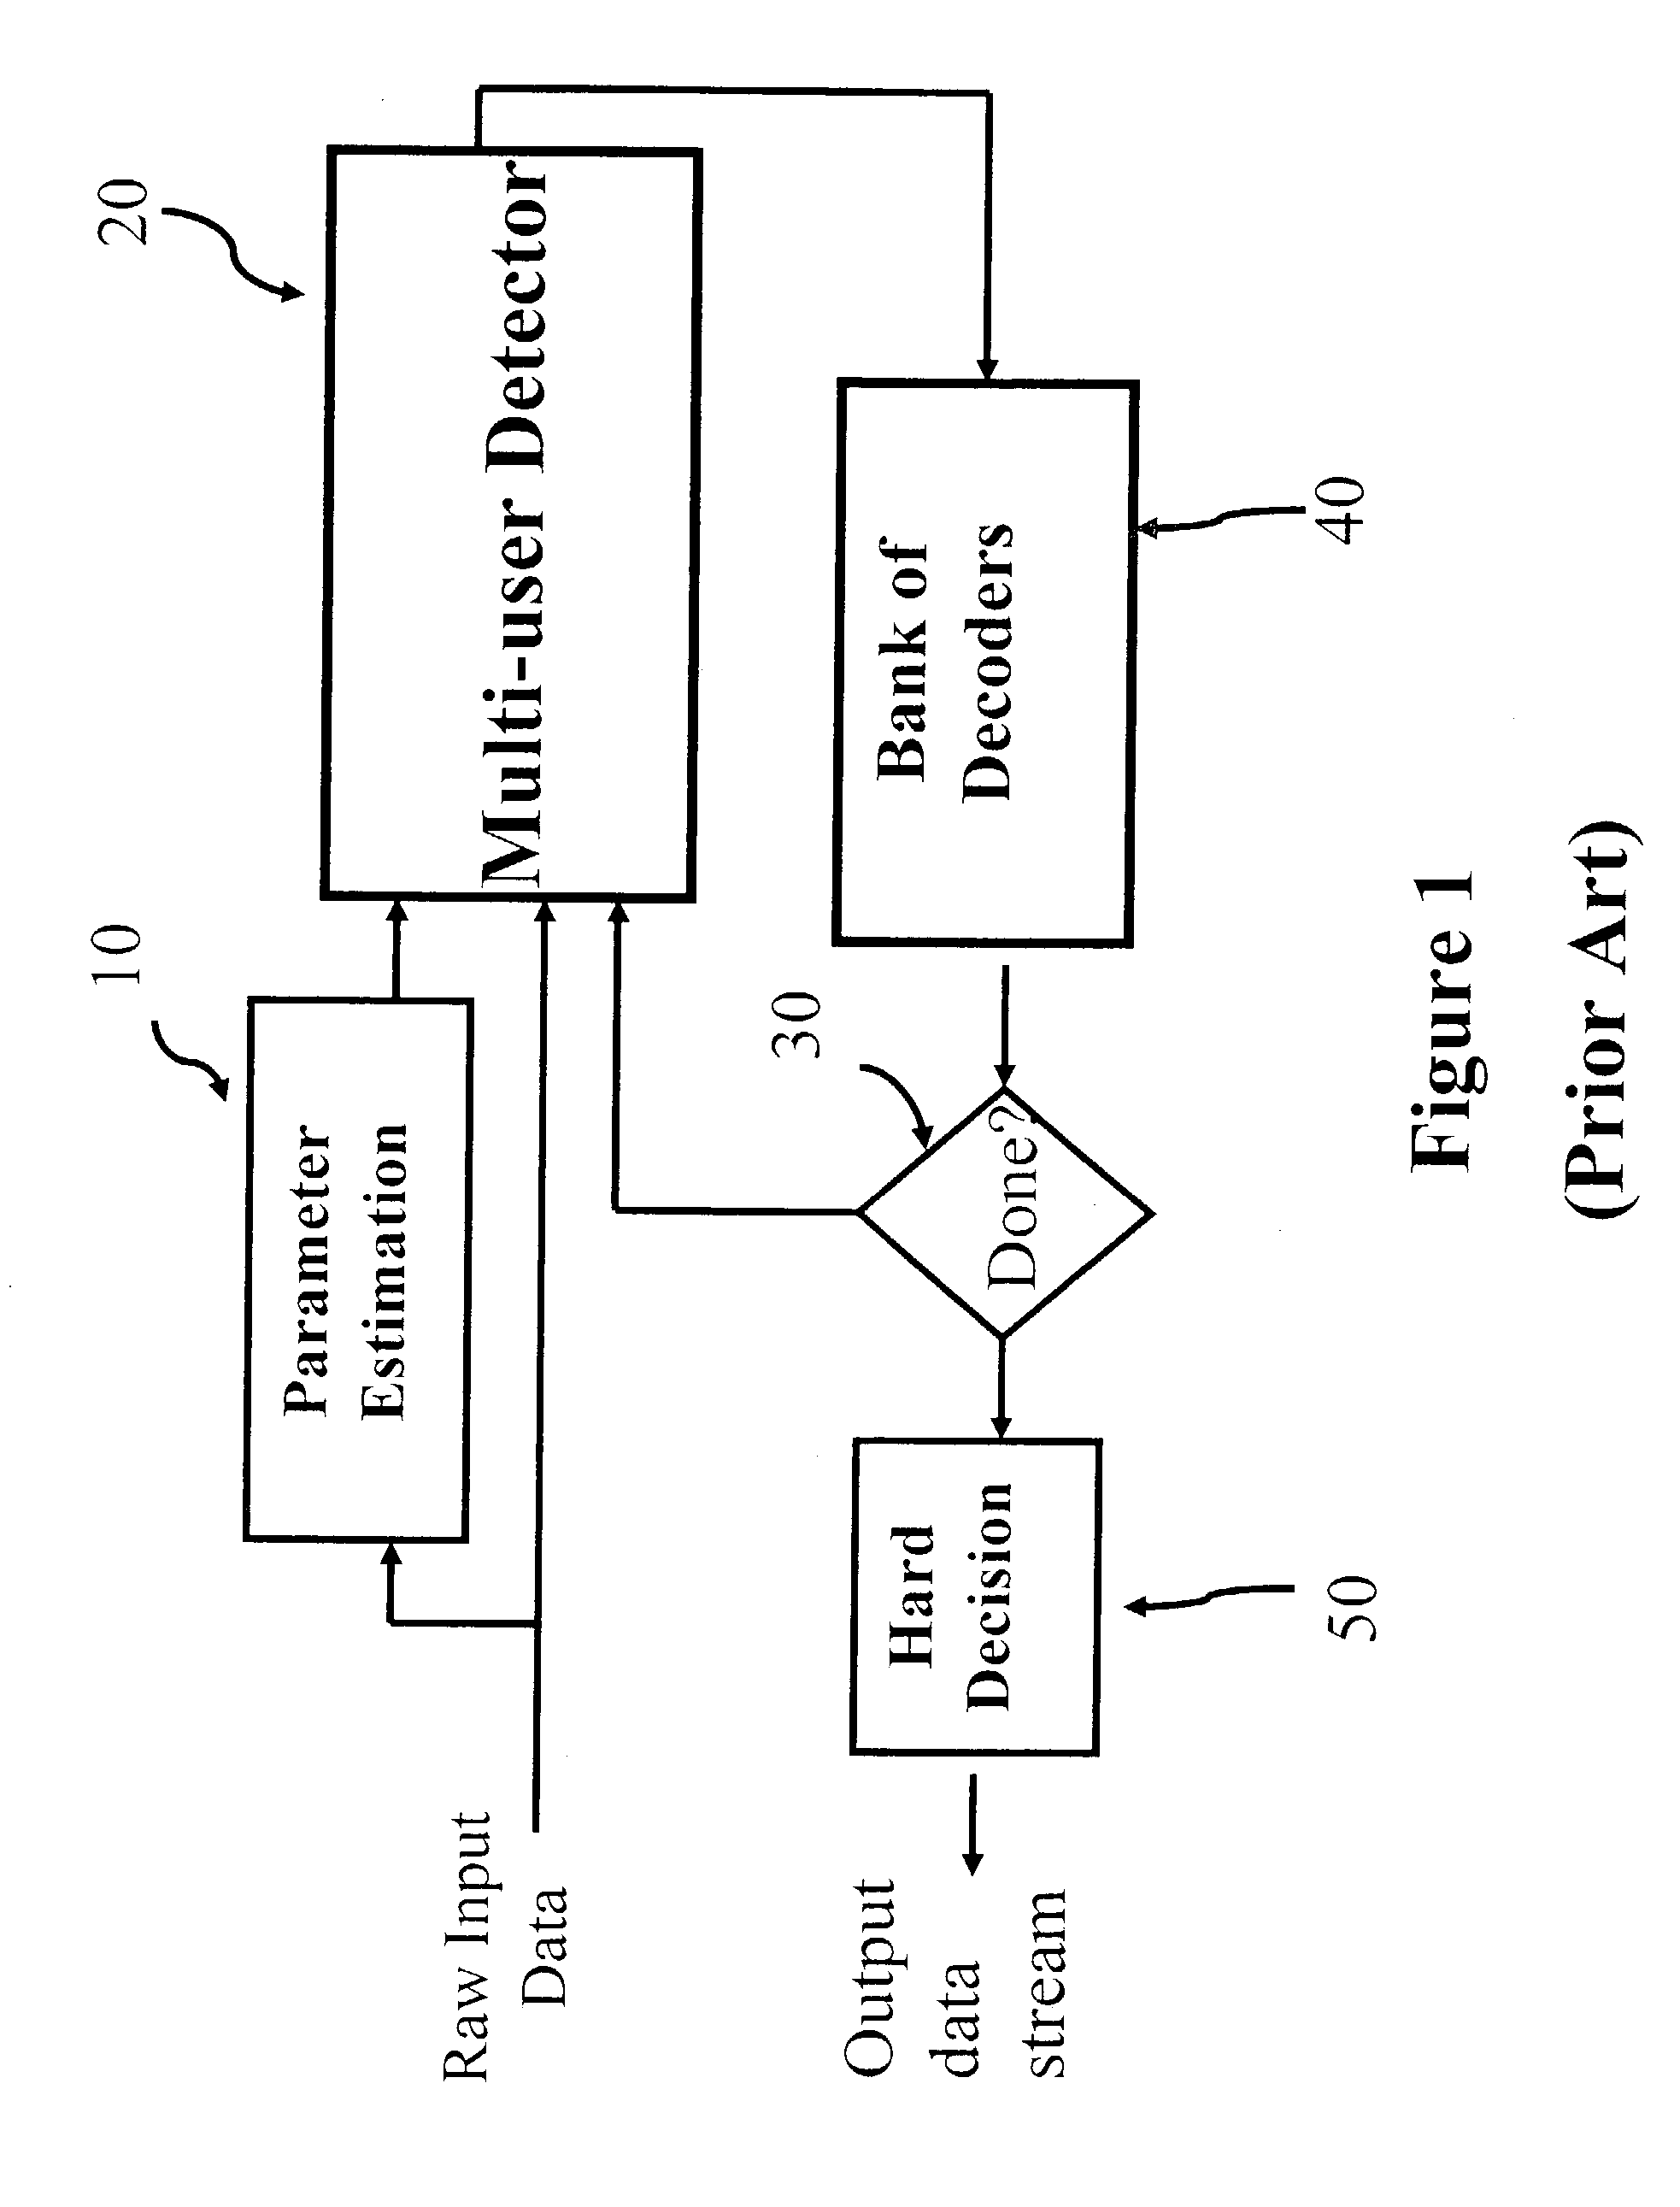 Deferred decorrelating decision-feedback detector for supersaturated communications